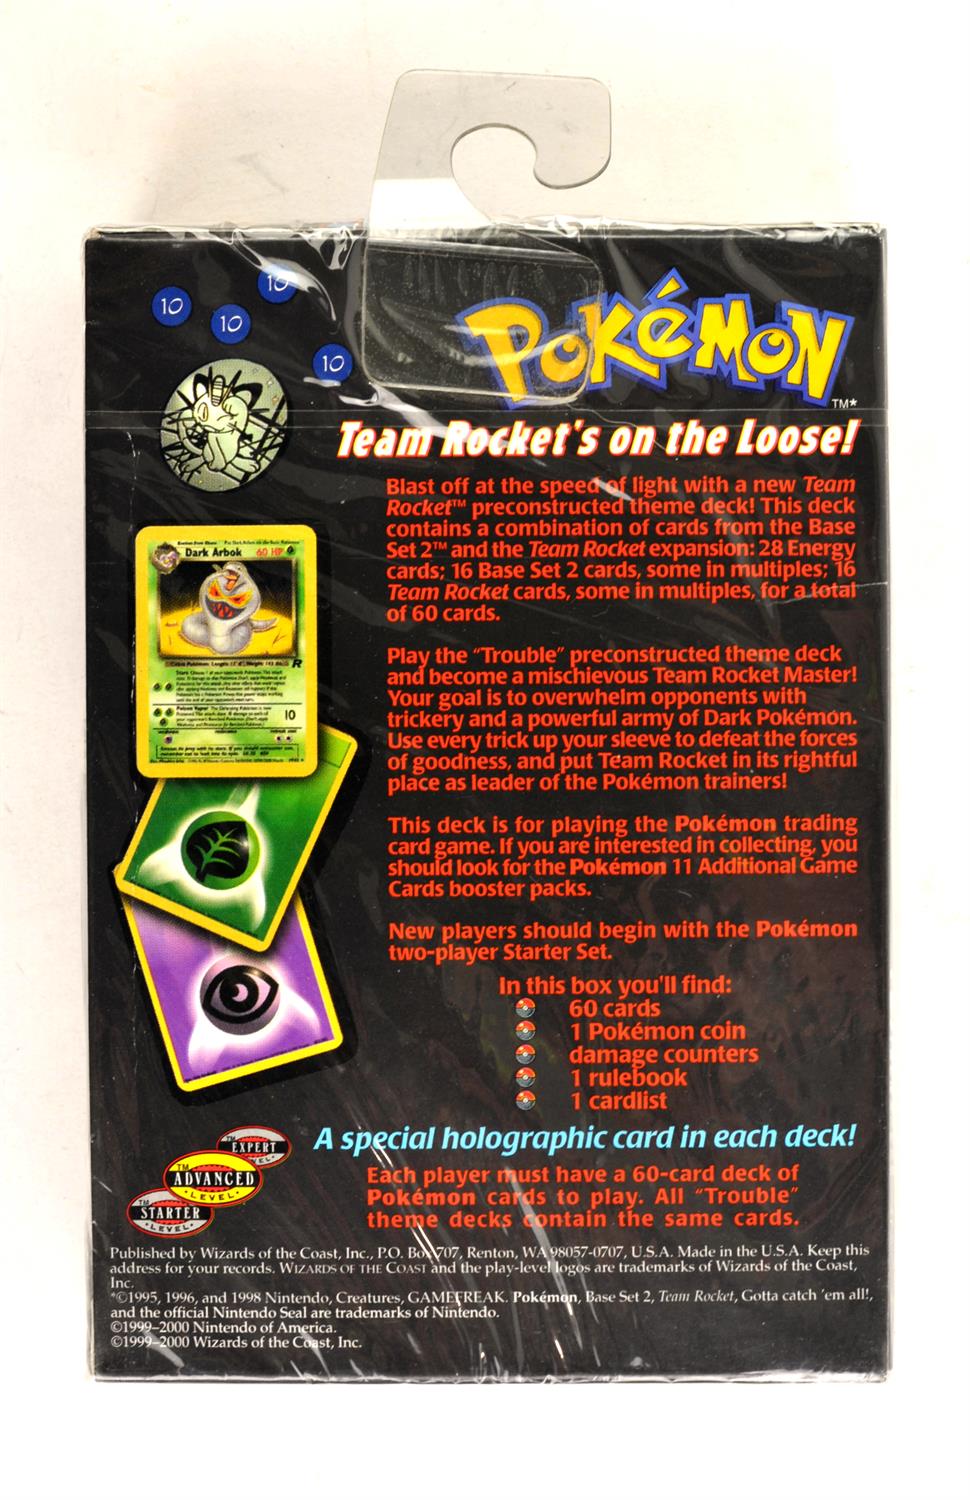 Pokemon TCG. Team Rocket Trouble Theme Deck, Sealed. Deck is in excellent condition, seal intact, - Image 2 of 6